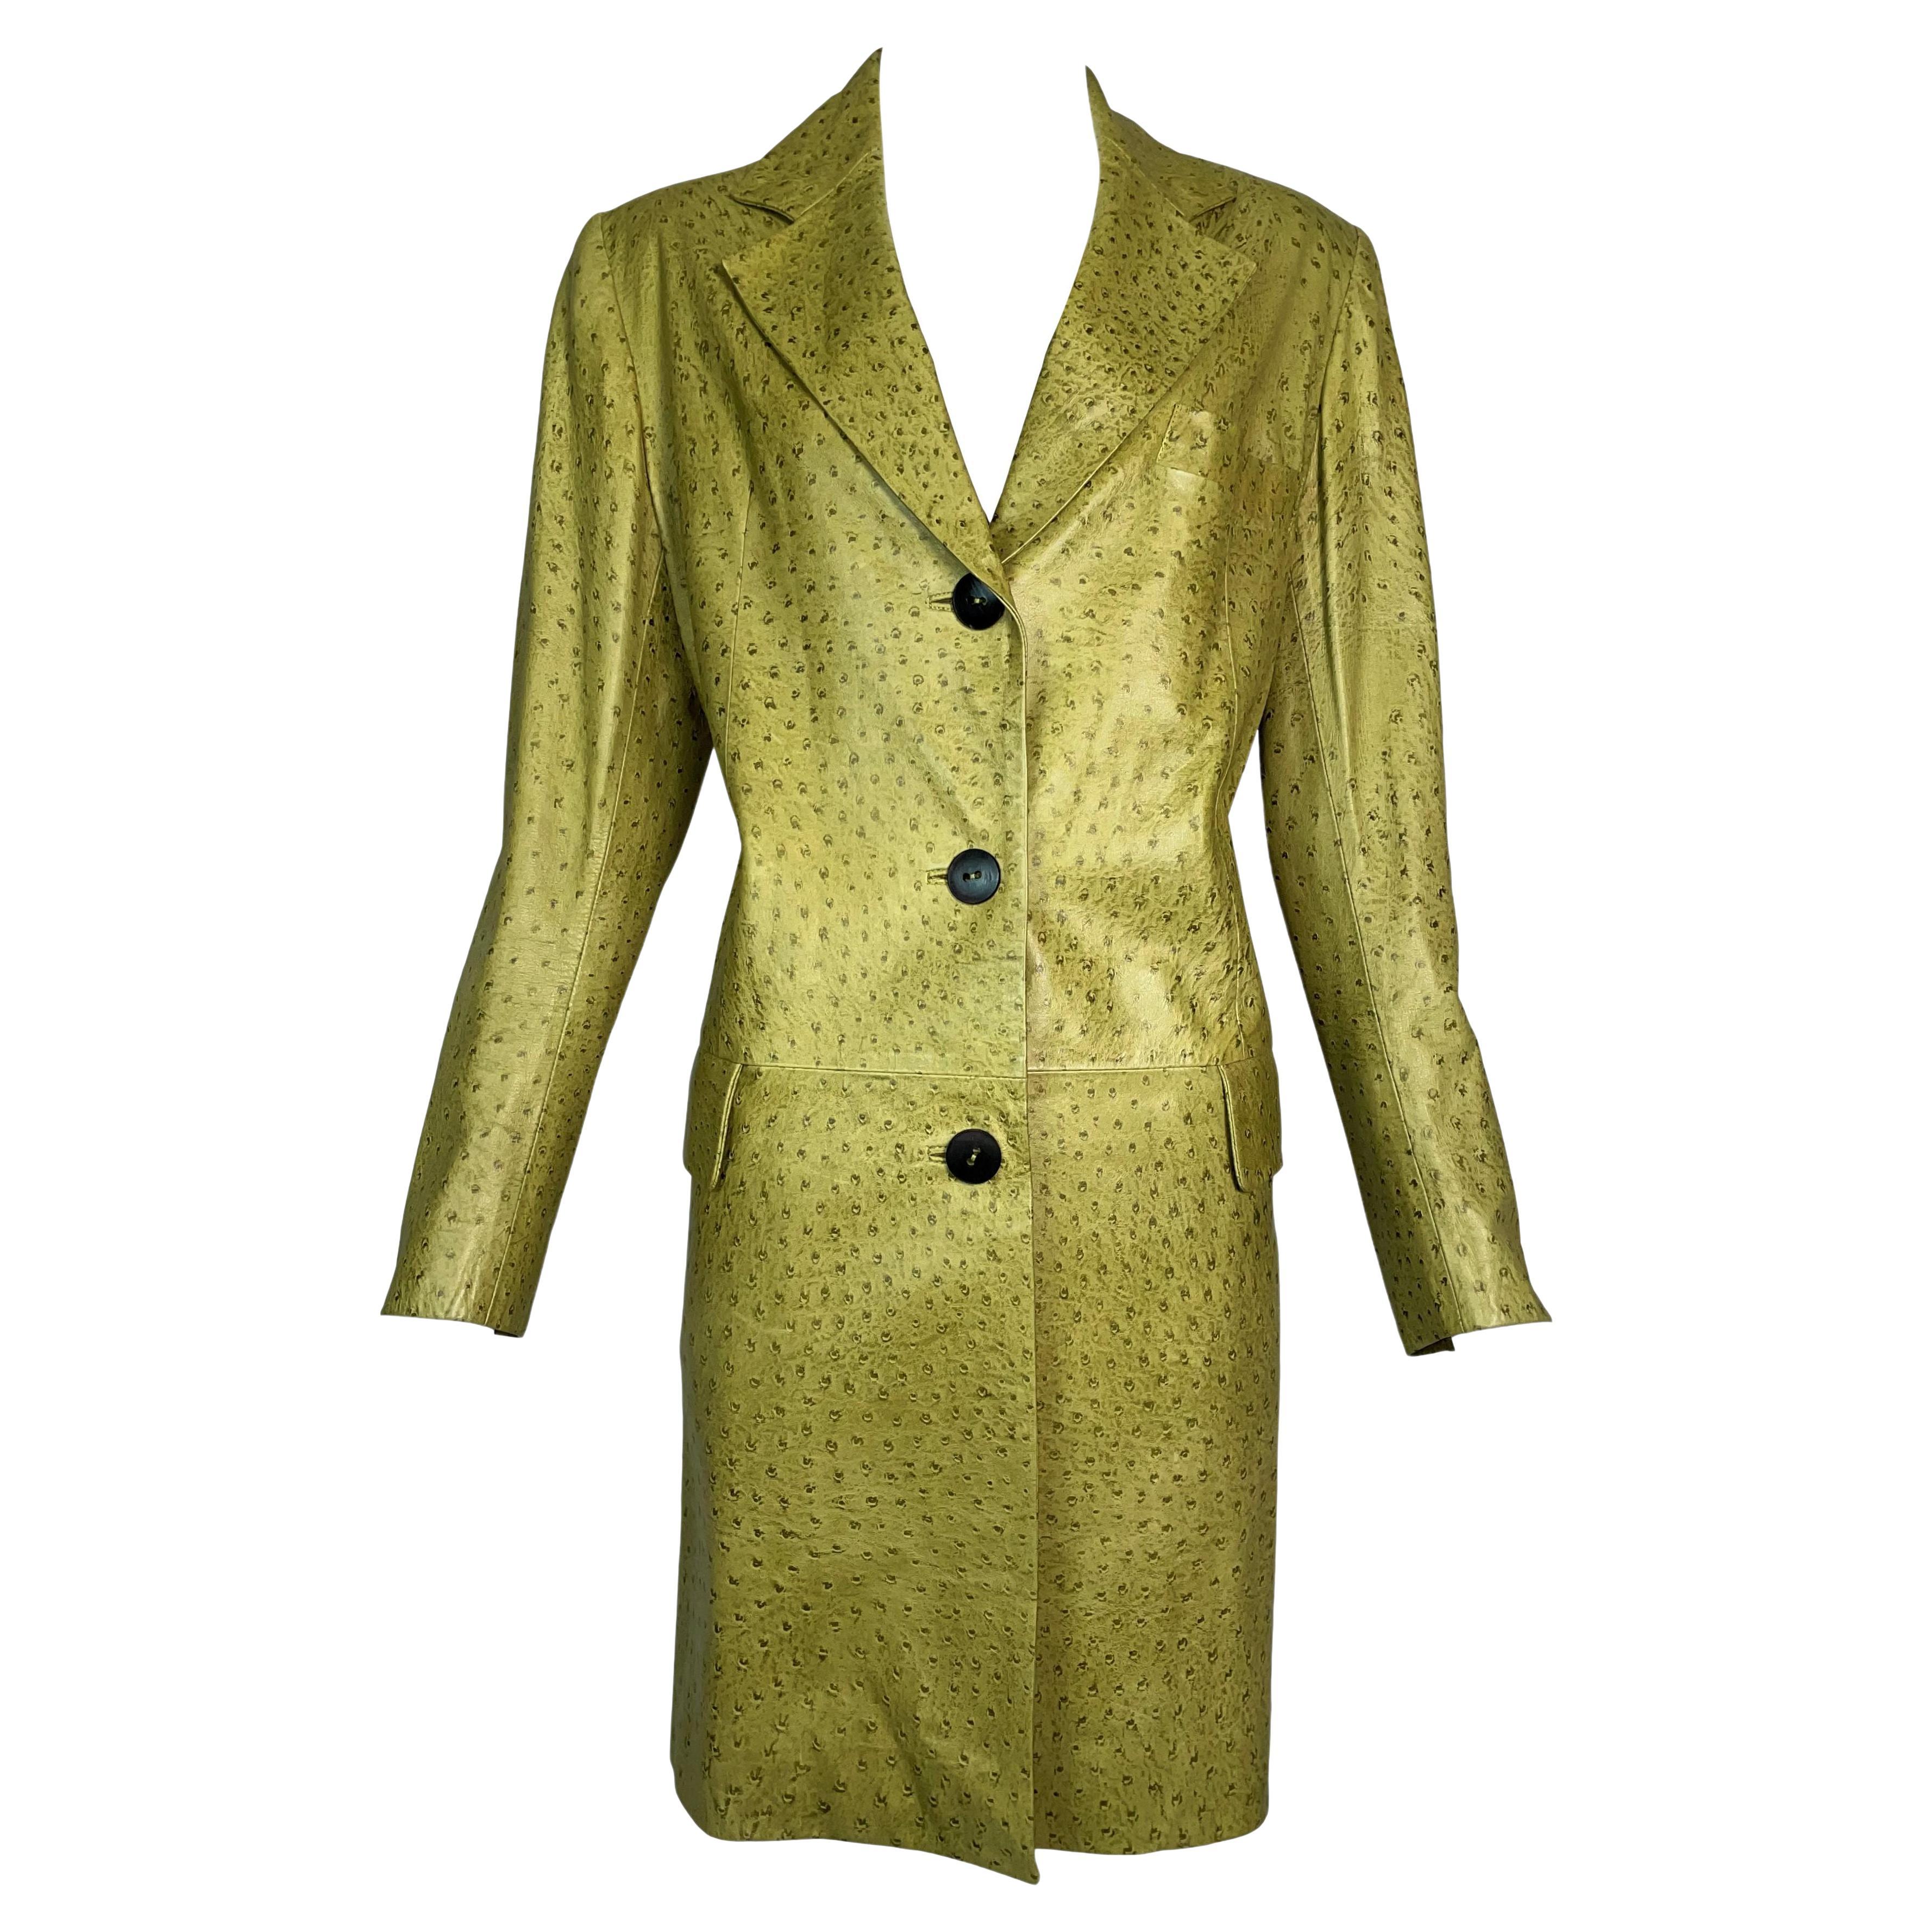 F/W 2000 Christian Dior John Galliano Green Leather Ostrich Trench Coat Jacket